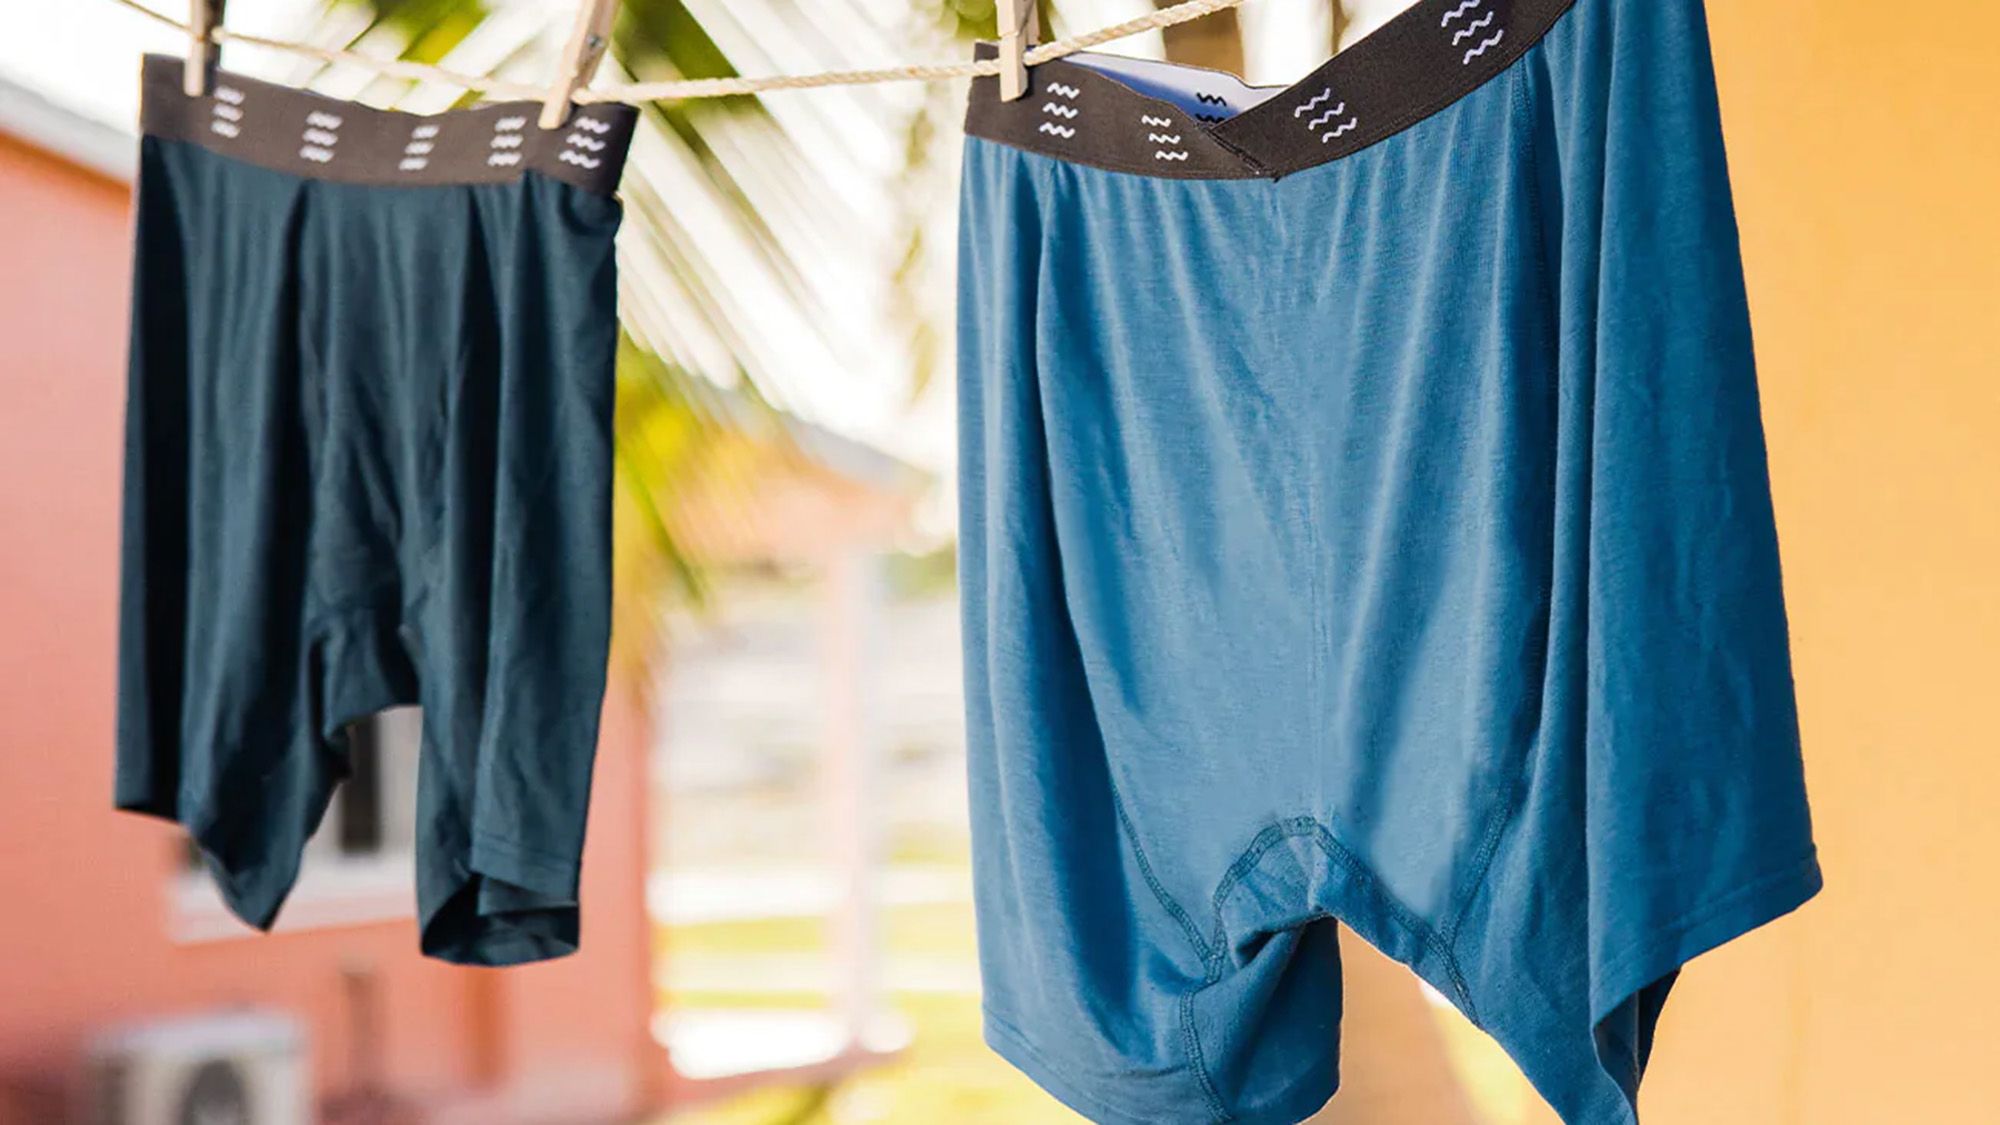 I Tried 'Smart Underwear' Made to Keep You Dry and Cool, and They're Better  Than Any Pair I've Worn